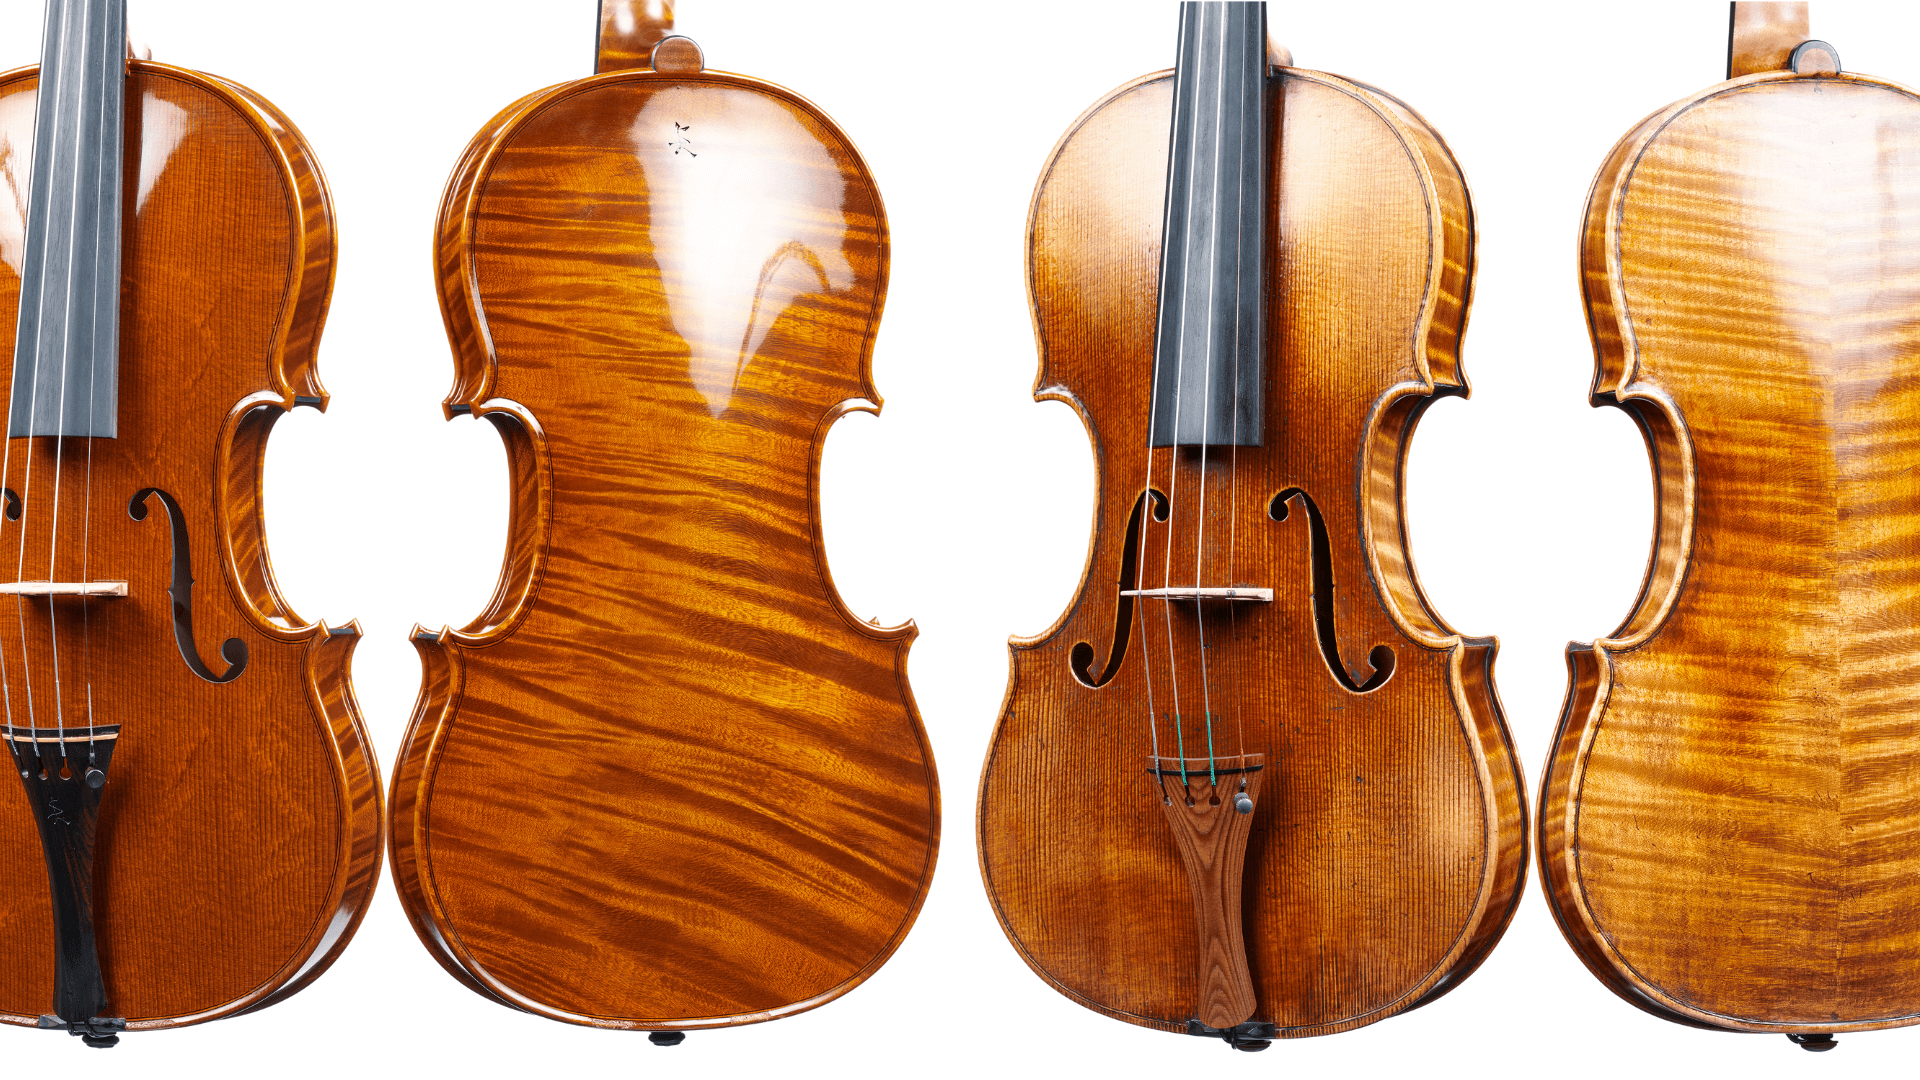 four different handcrafted violin models